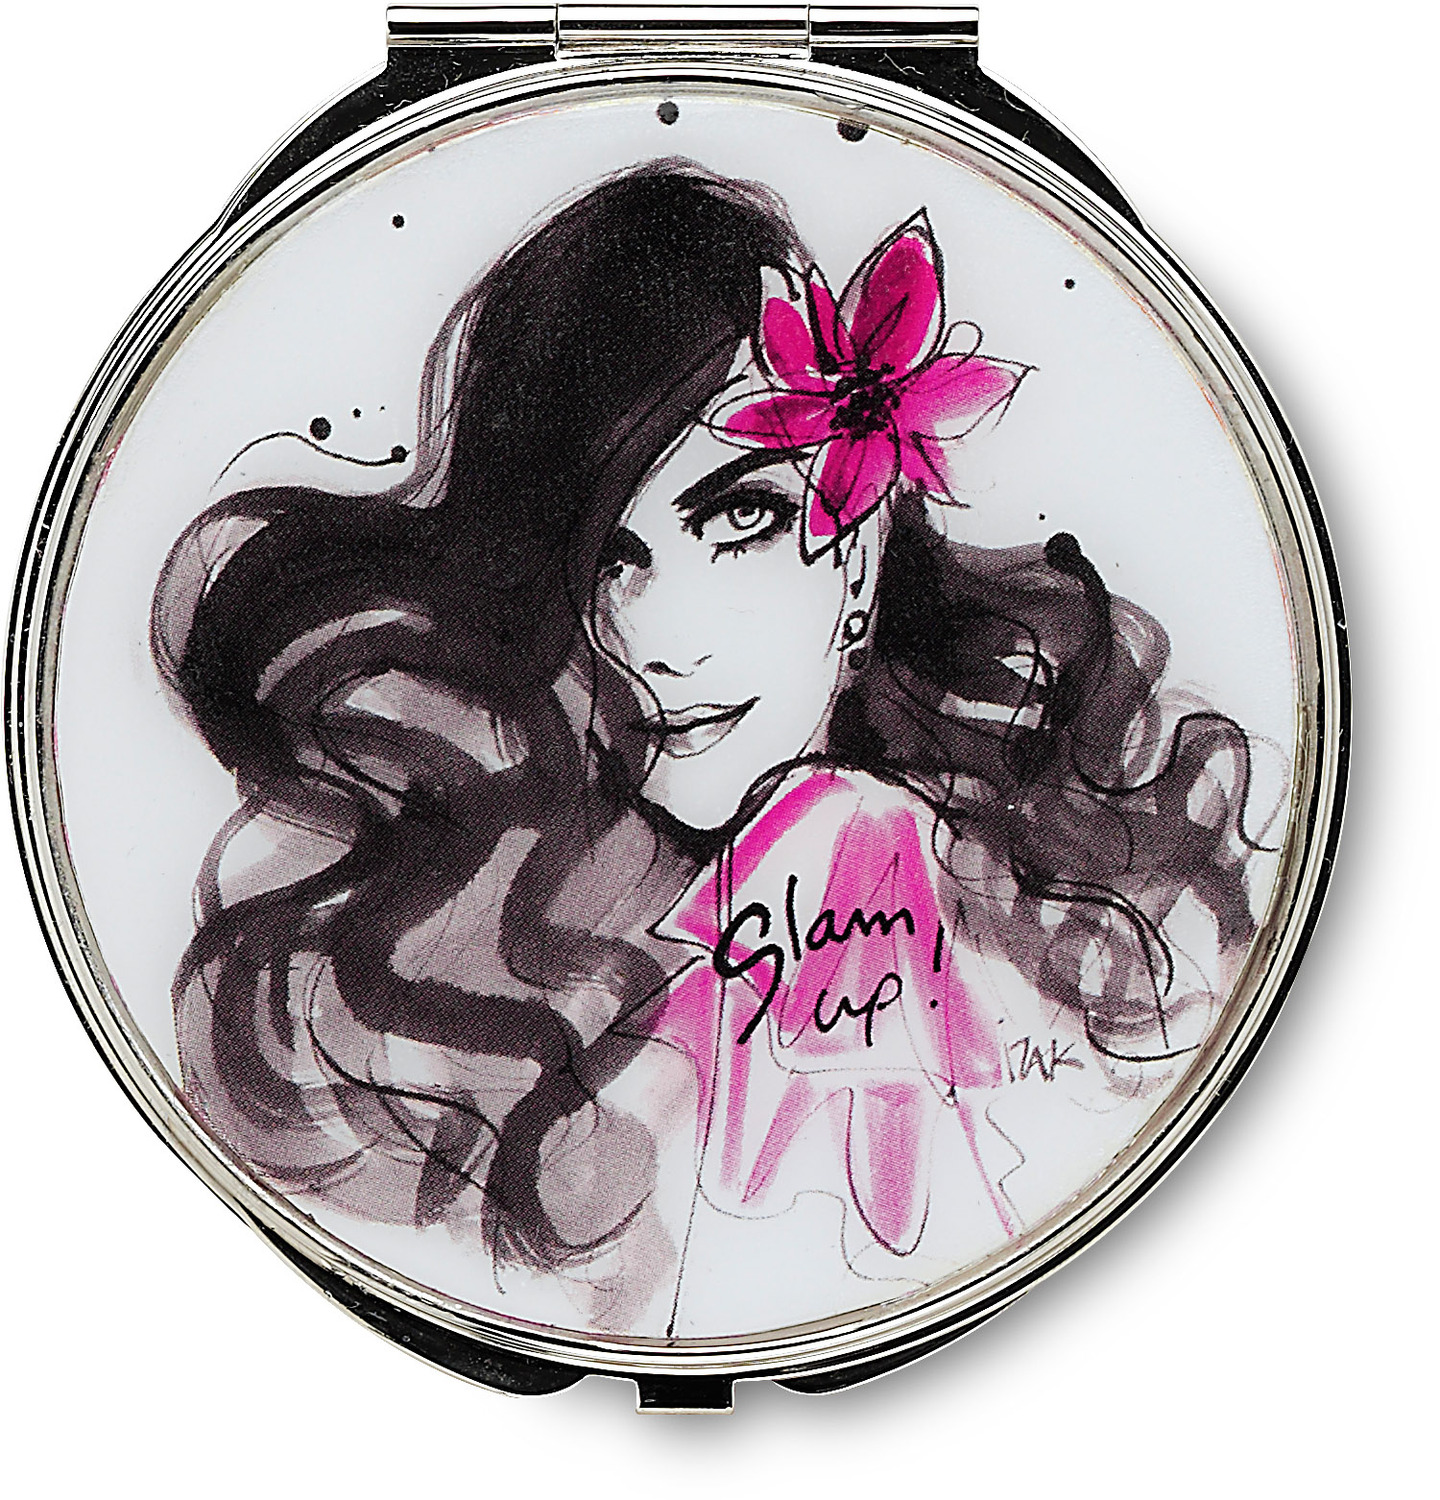 Glam up! by IZAK - Glam up! - 2.75" Compact Mirror